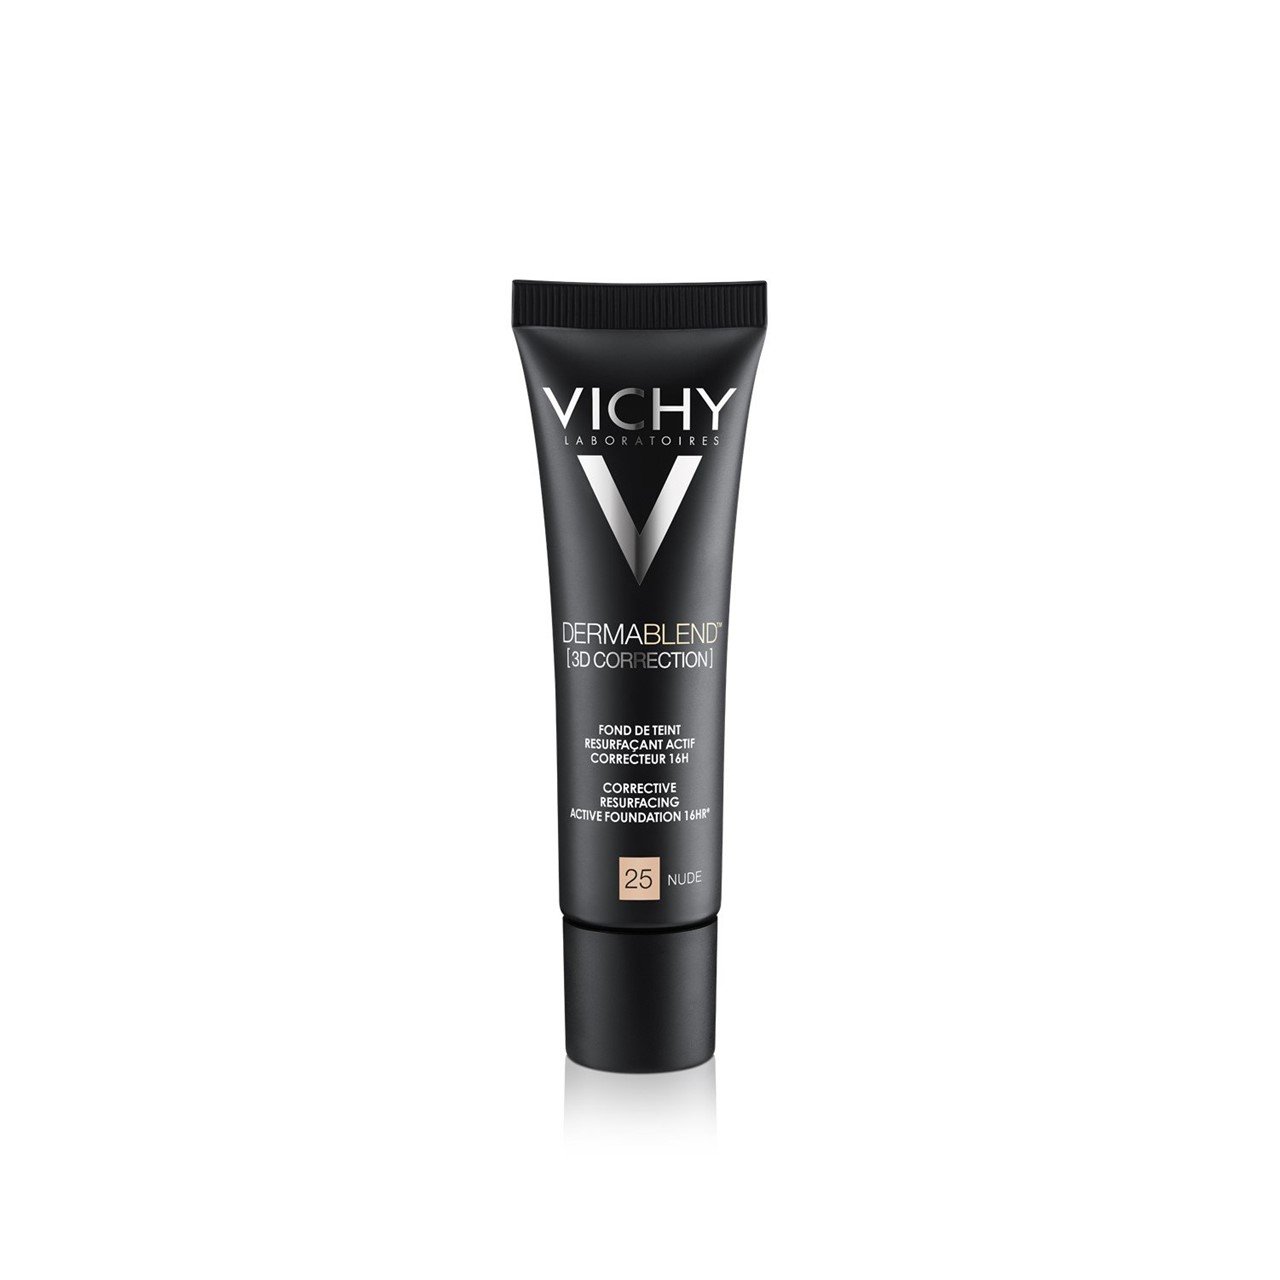 Compra Vichy Dermablend D Correction Foundation Nude Ml Mexico